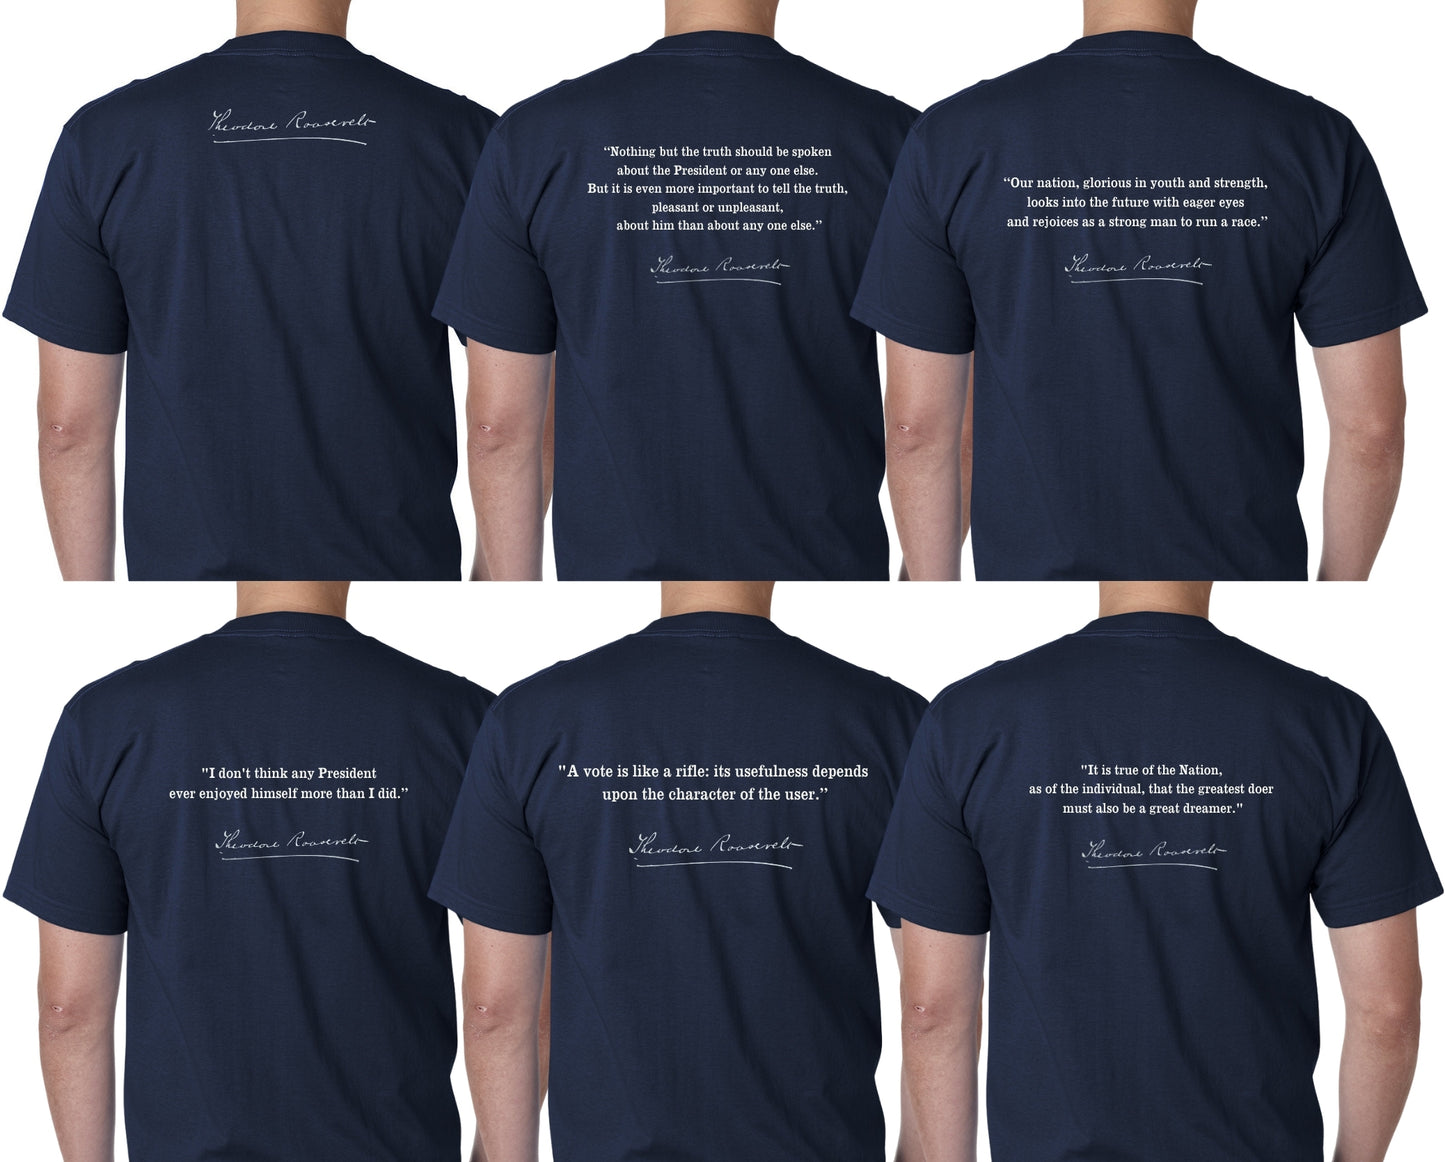 All back designs of the Teddy Roosevelt “I’m ready to vote for Teddy” presidential campaign shirt — Made in America from The History List store